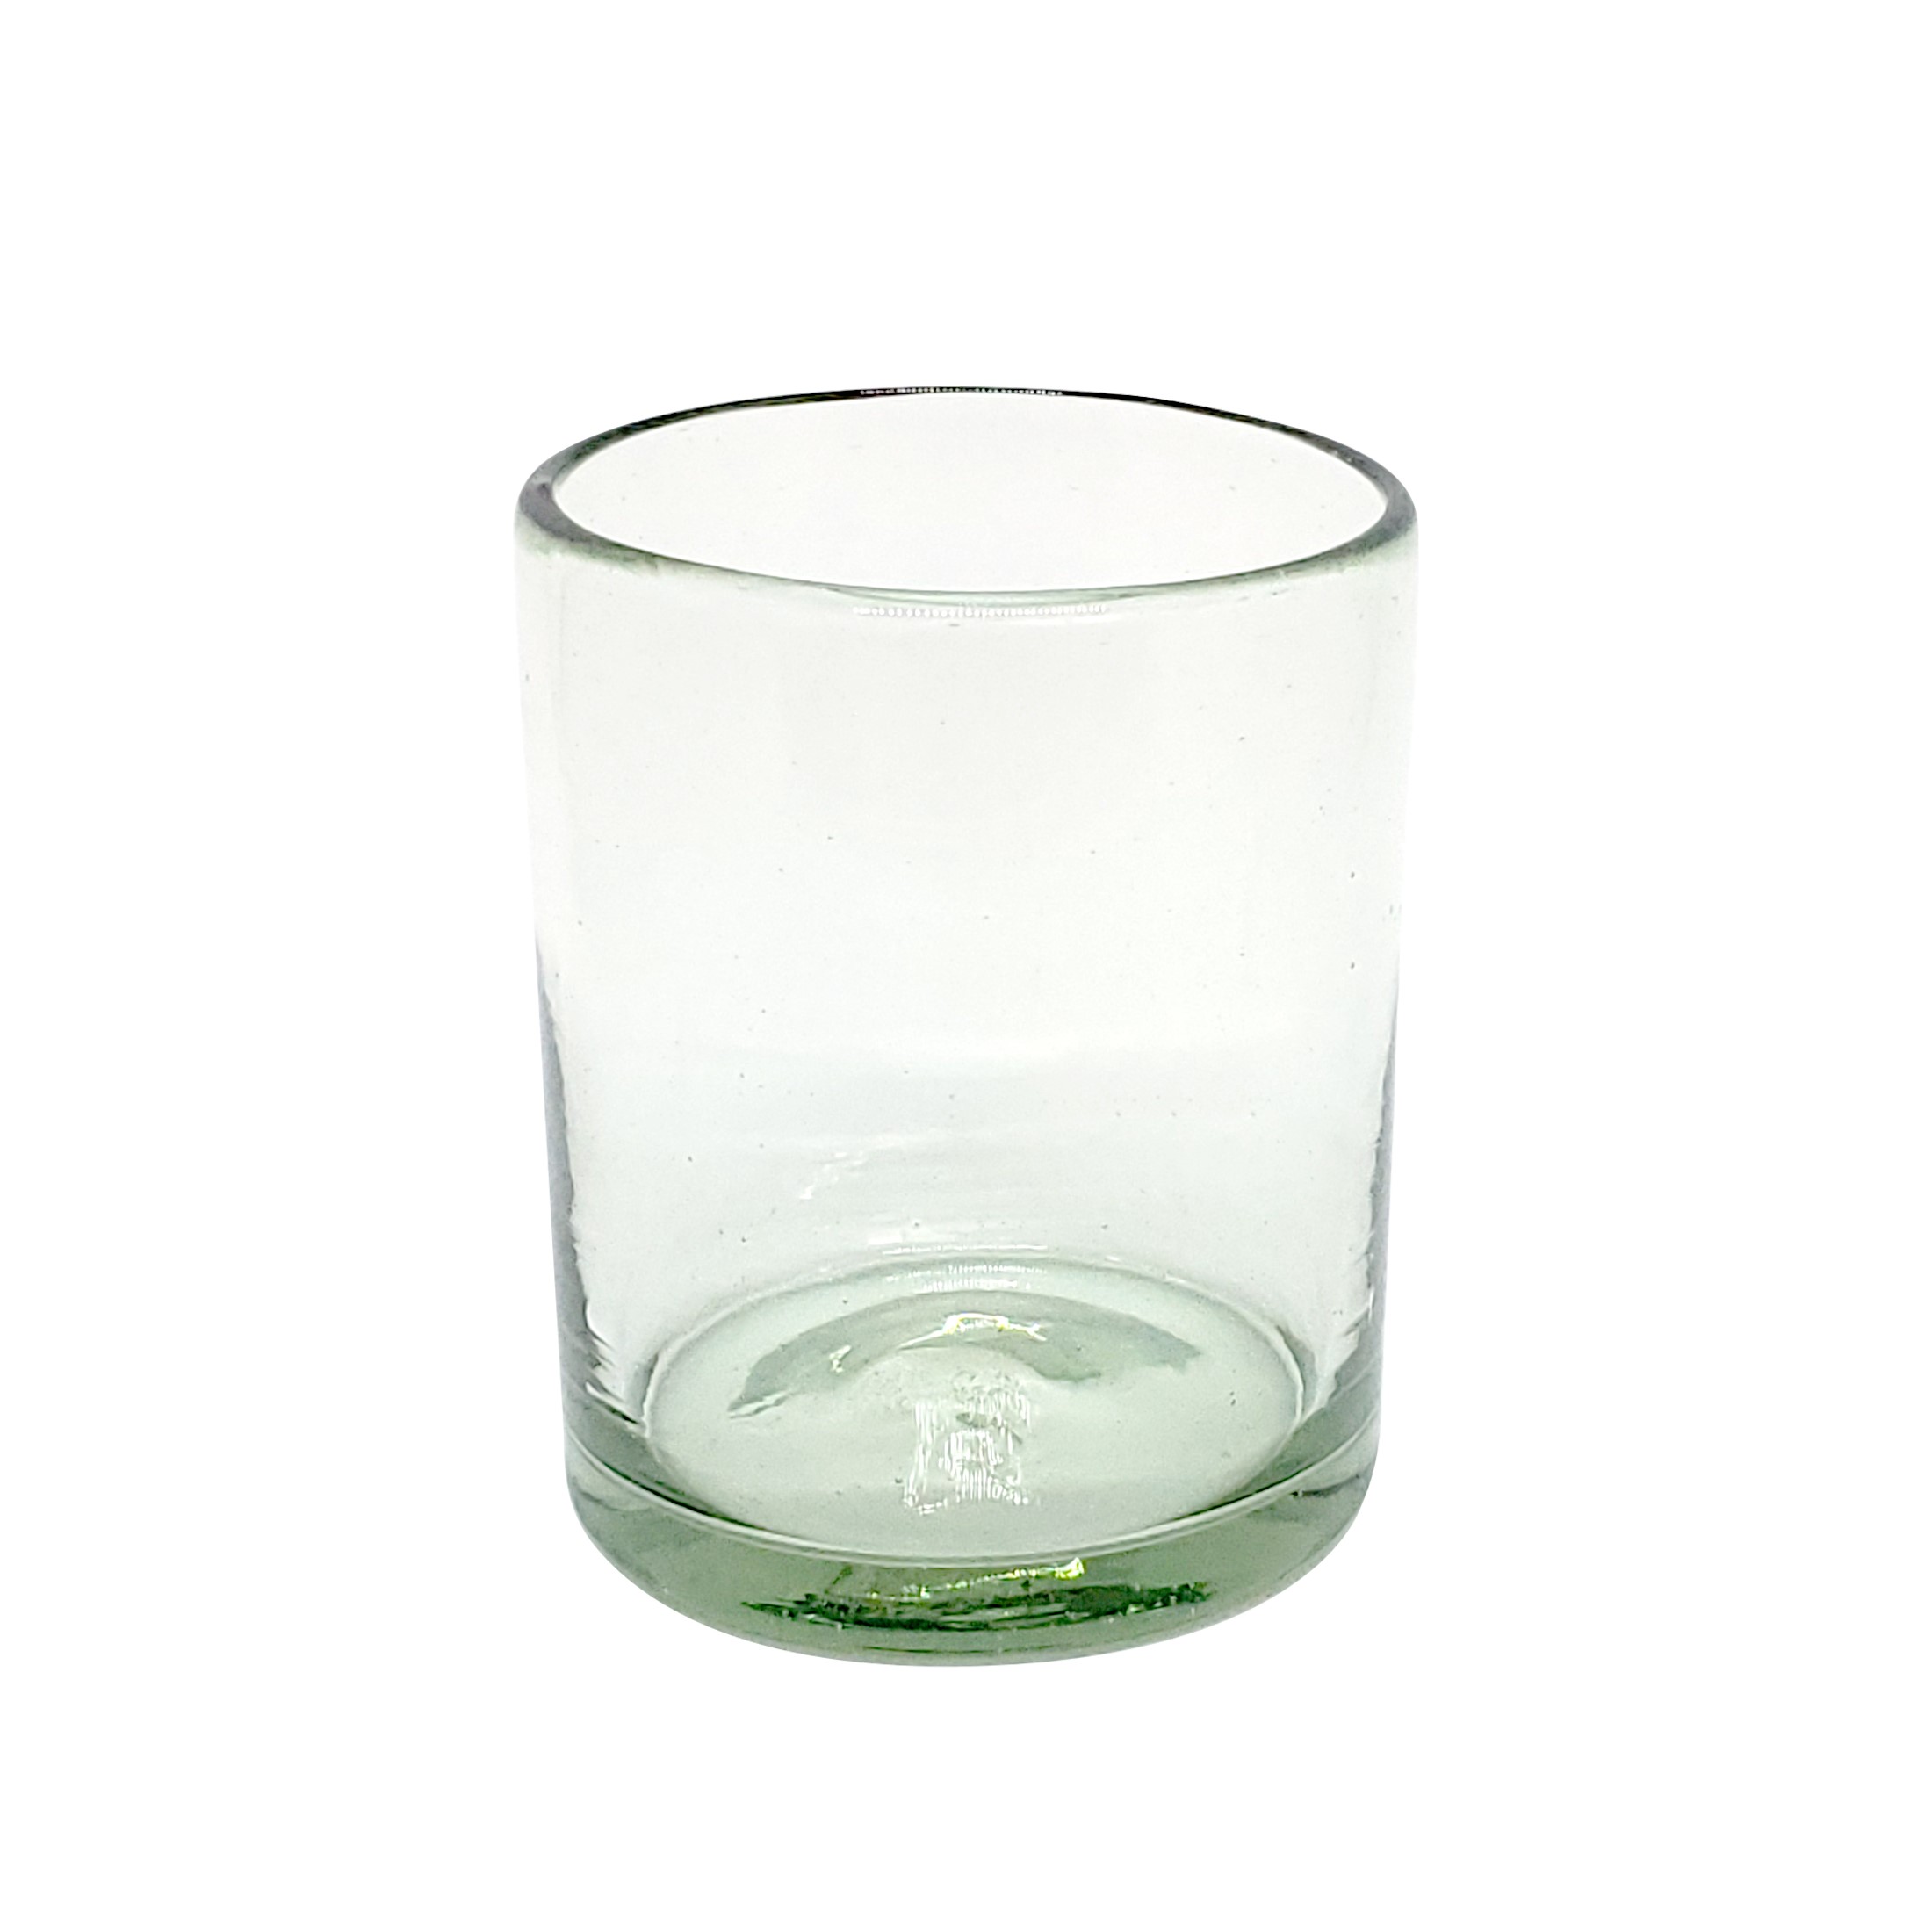 Sale Items / Clear 10 oz Tumblers (set of 6) / For a more traditional look, this tumblers are created through a 100% handcrafted process.